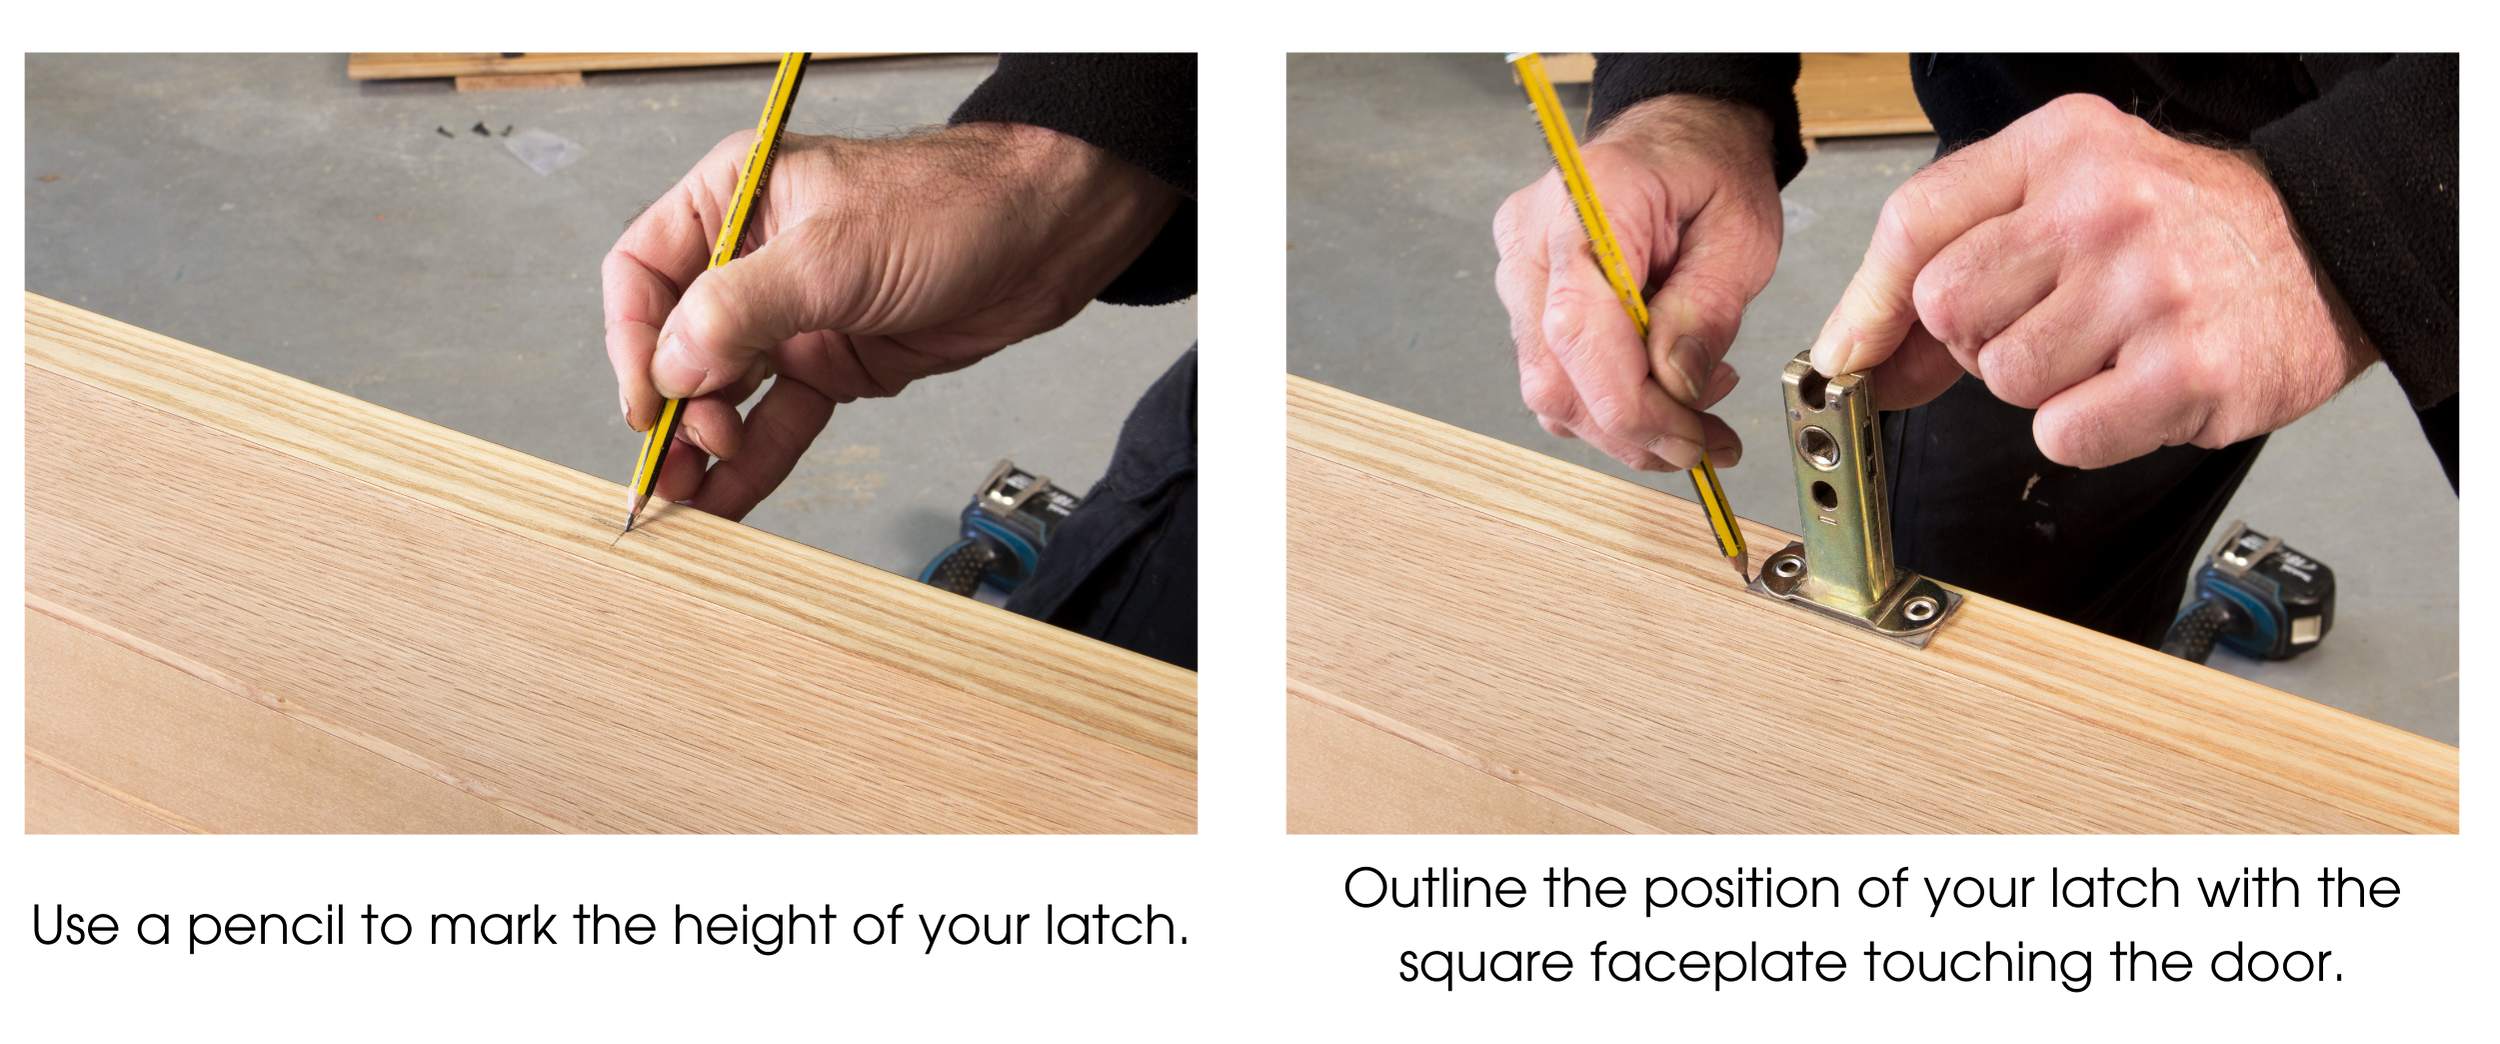 Person using a pencil to mark the height and draw the outline of a mortice latch on a wooden door.